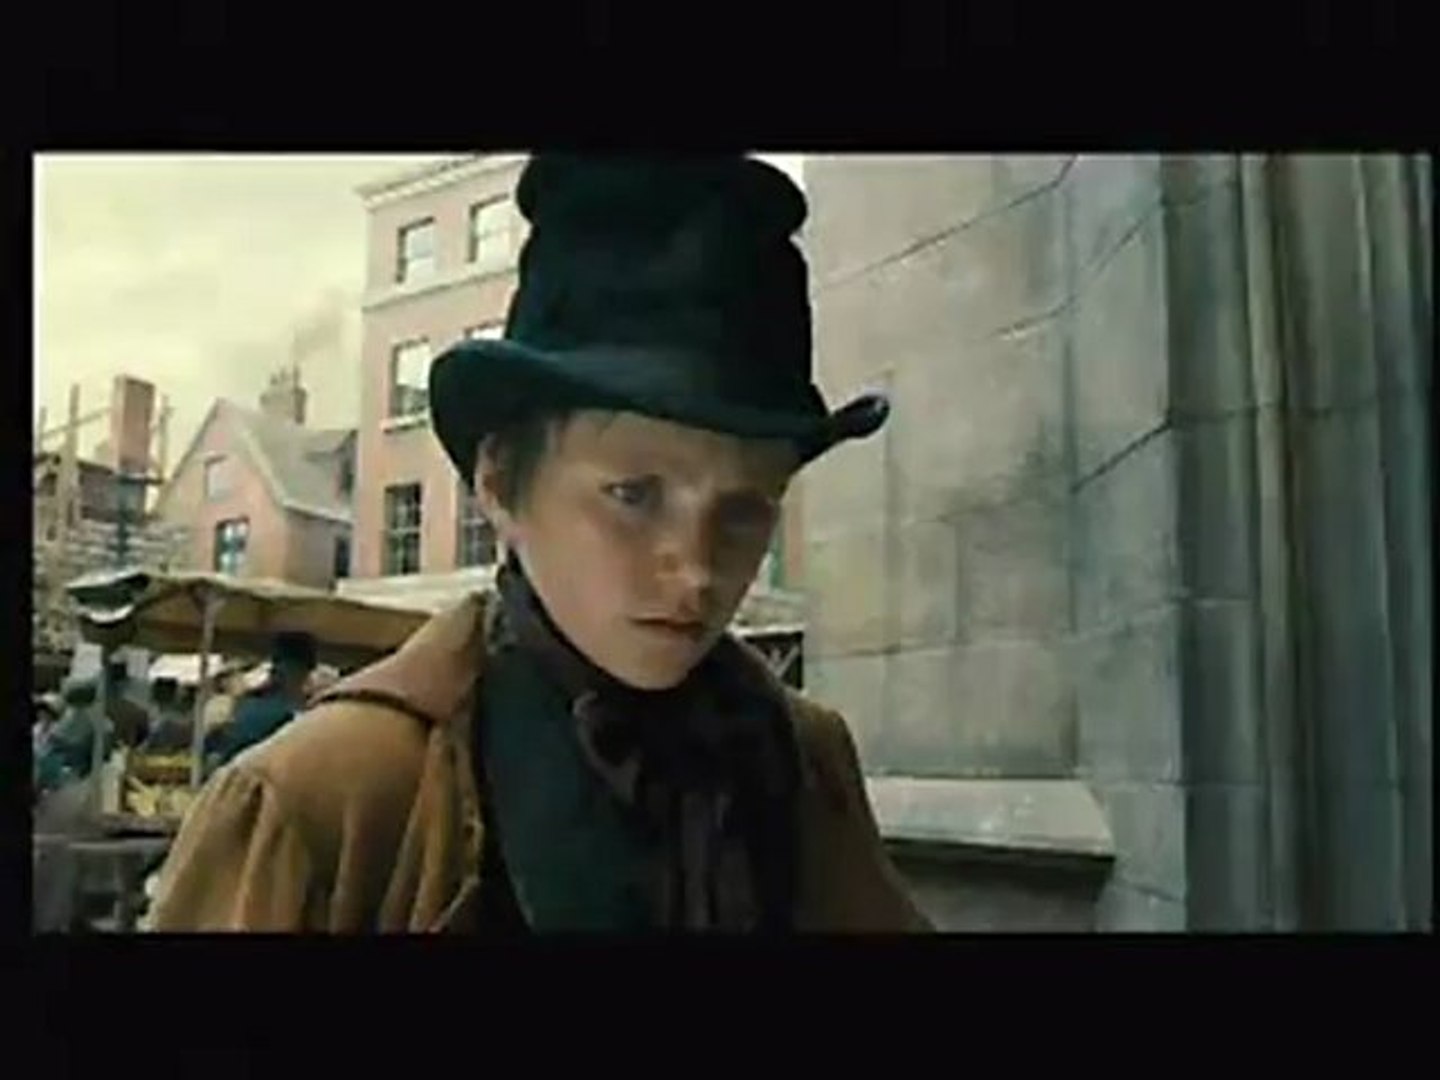 Oliver Twist - Clip - The Artful Dodger - video Dailymotion